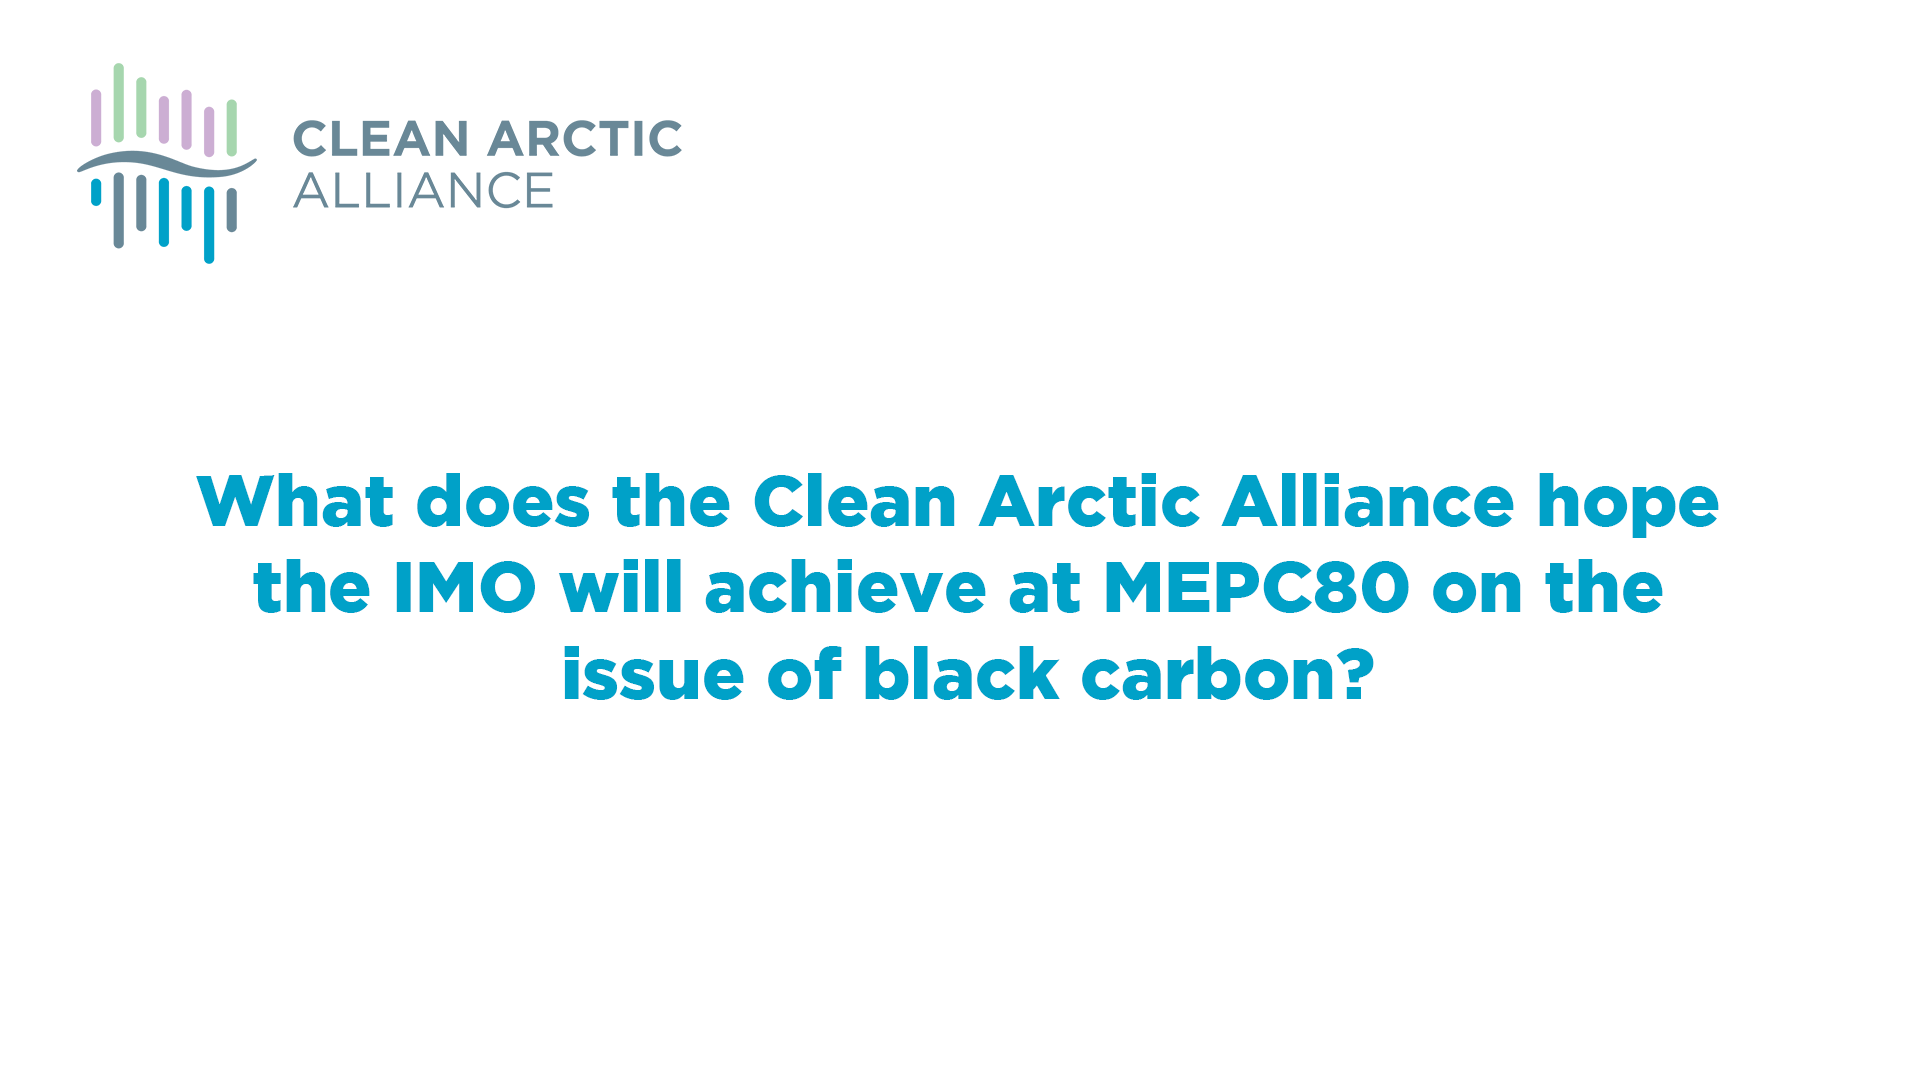 What does the Clean Arctic Alliance hope the IMO will achieve at MEPC80 on the issue of black carbon?